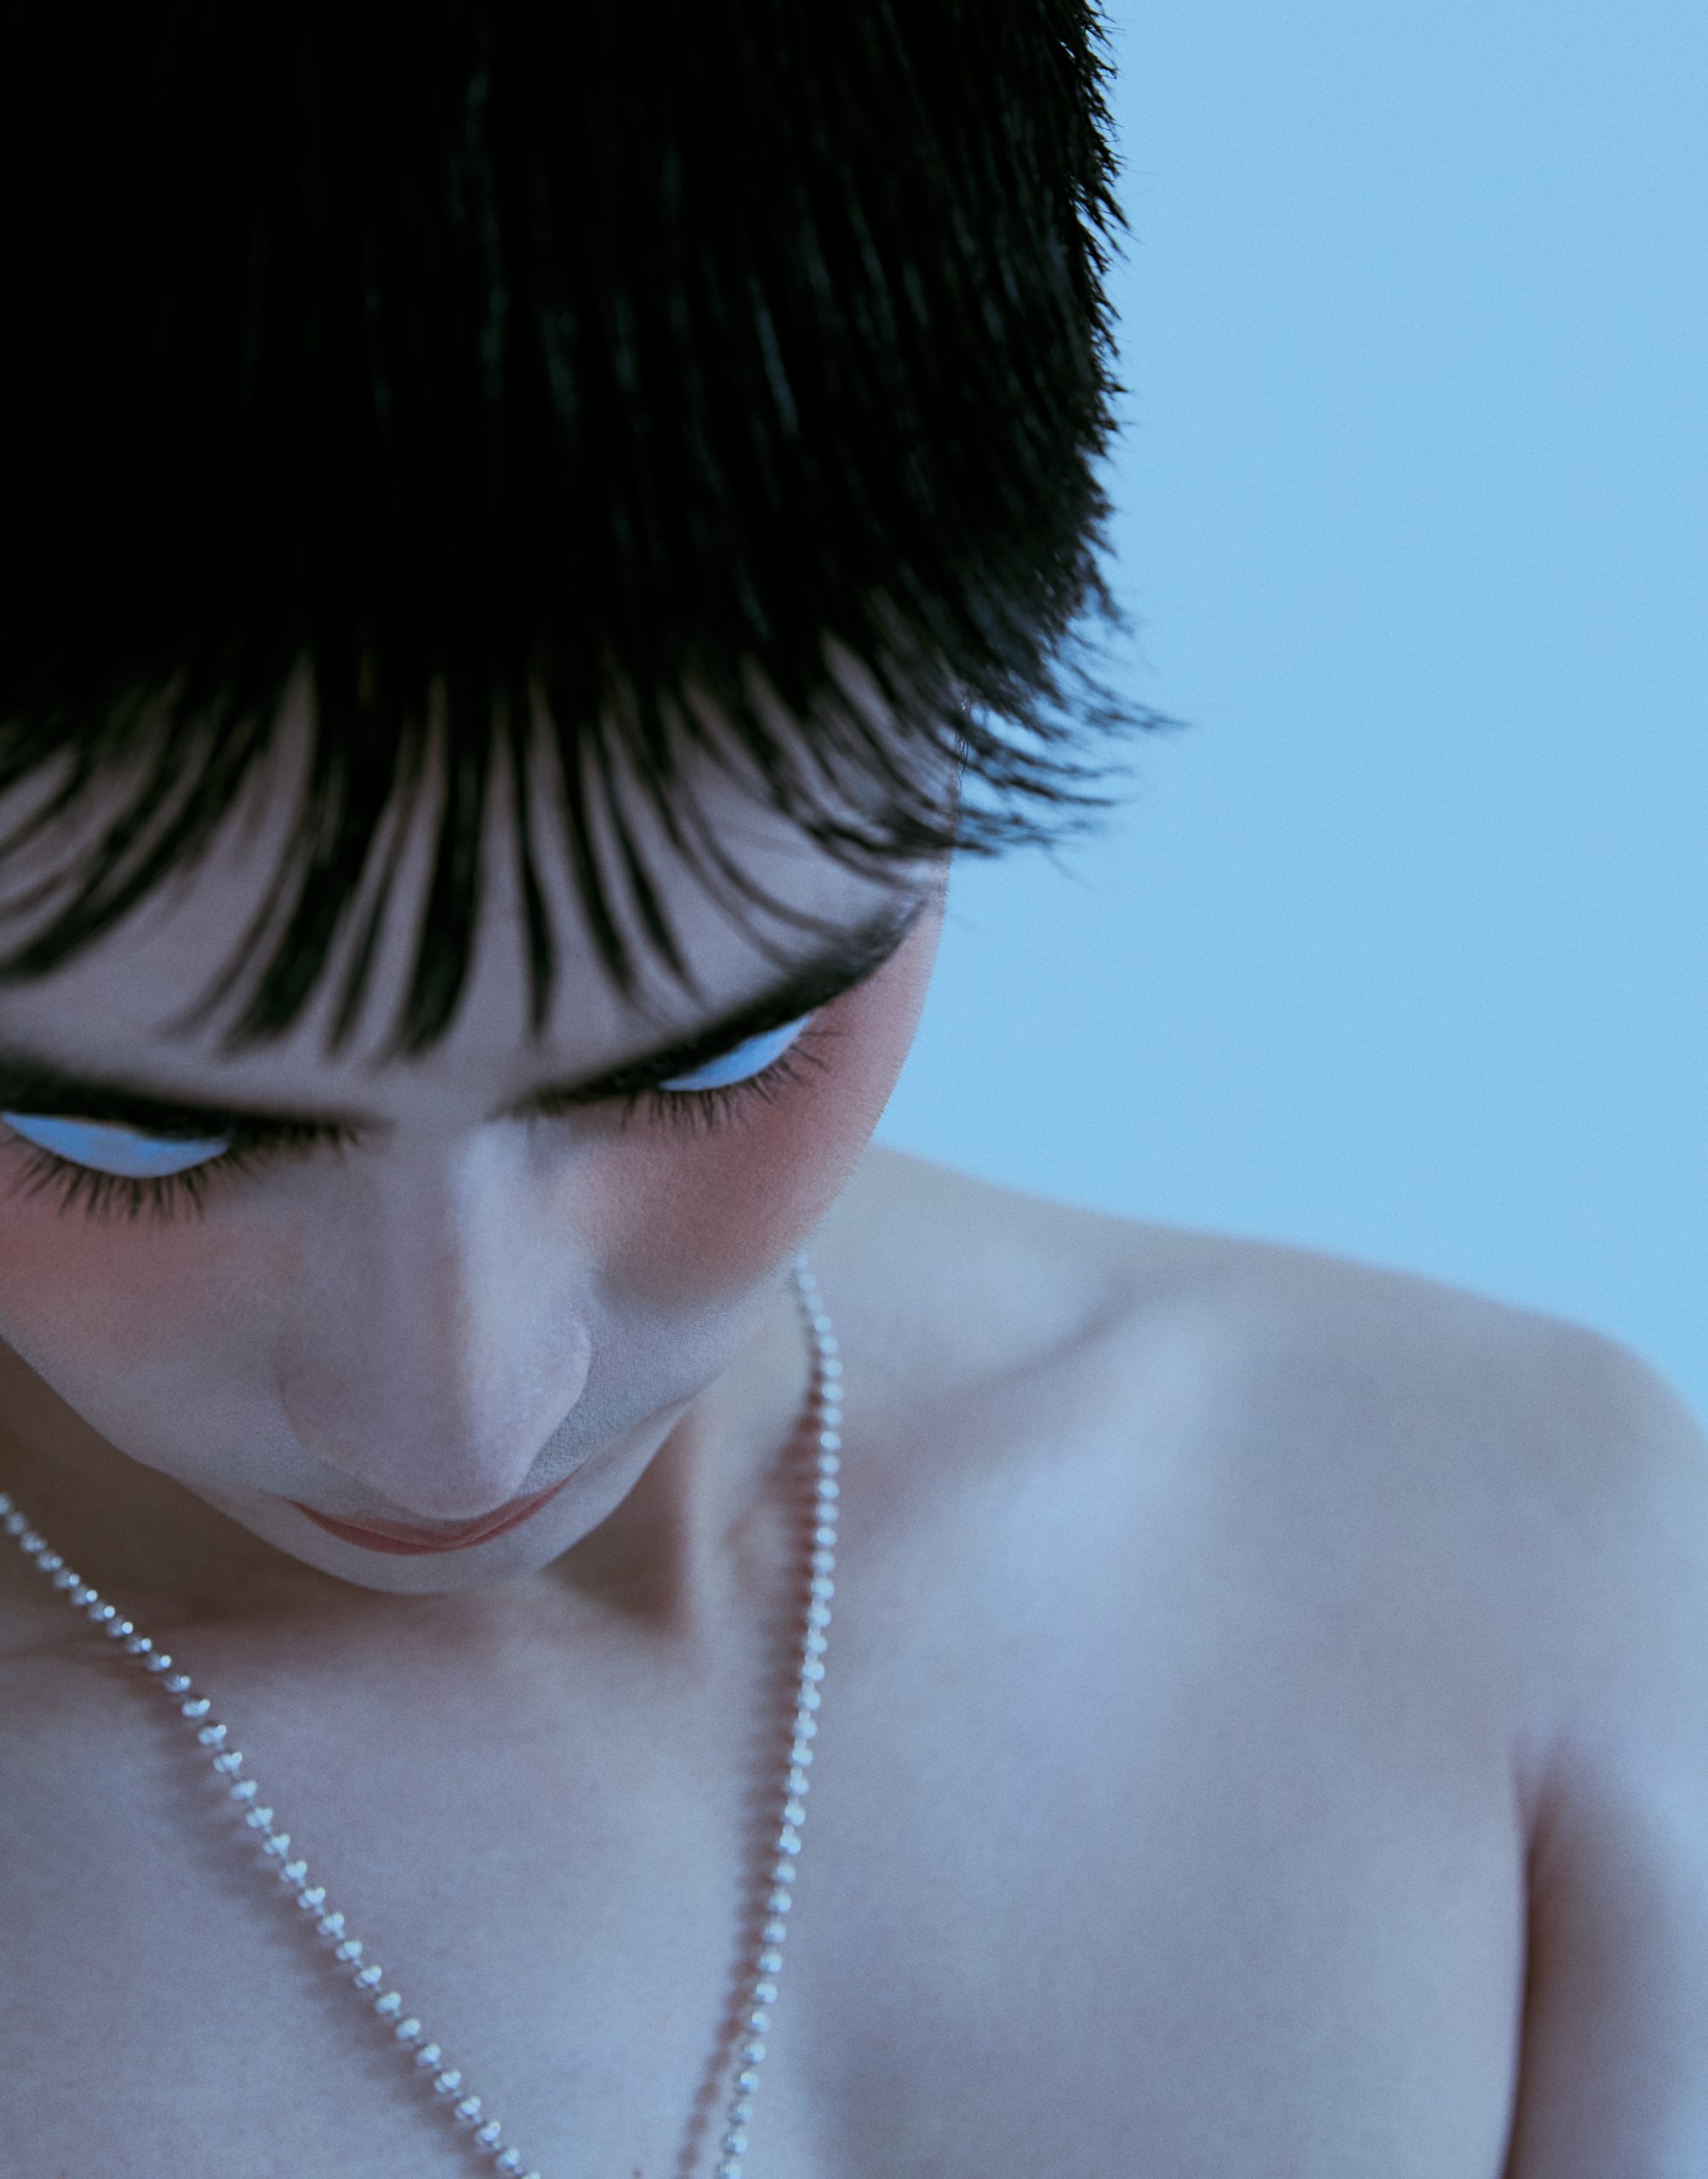 Man with blue eyeshadow and pearl necklace